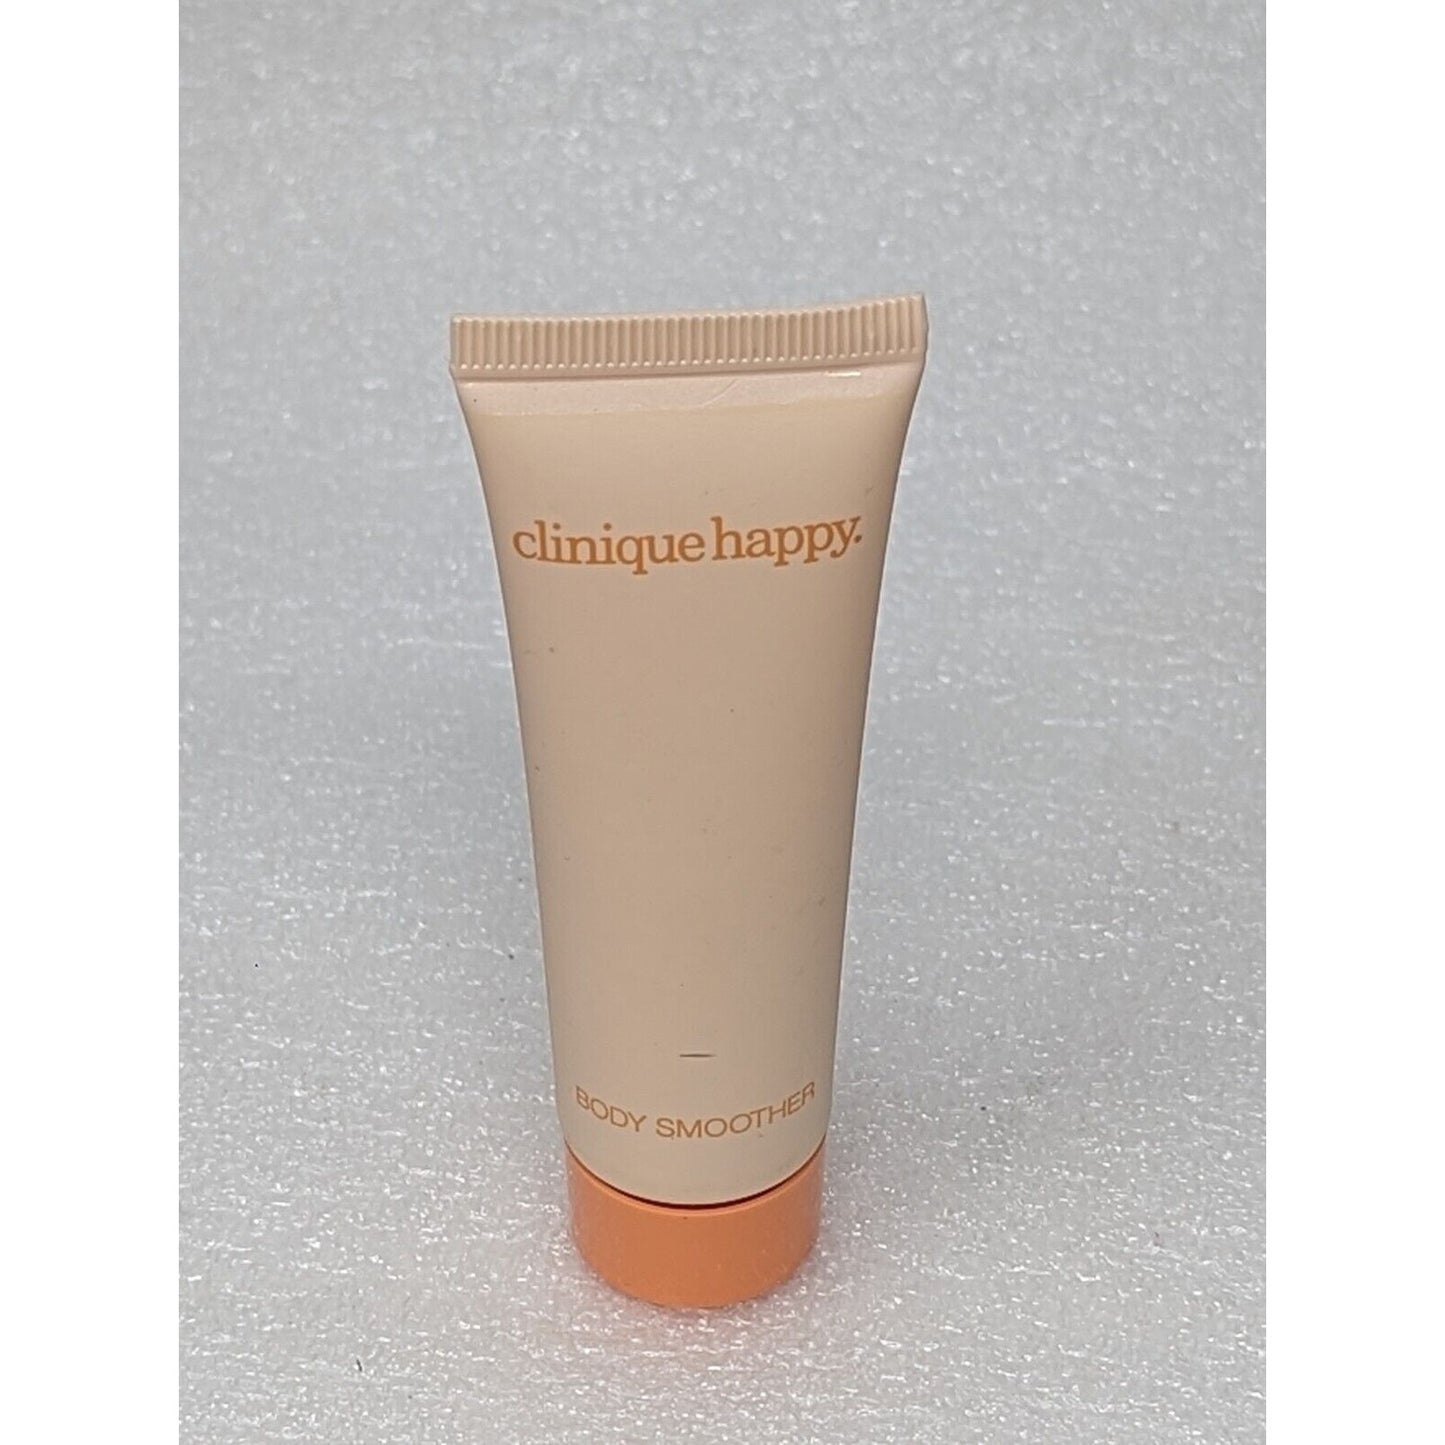 Clinique Happy Body Smoother 1 oz Travel Size